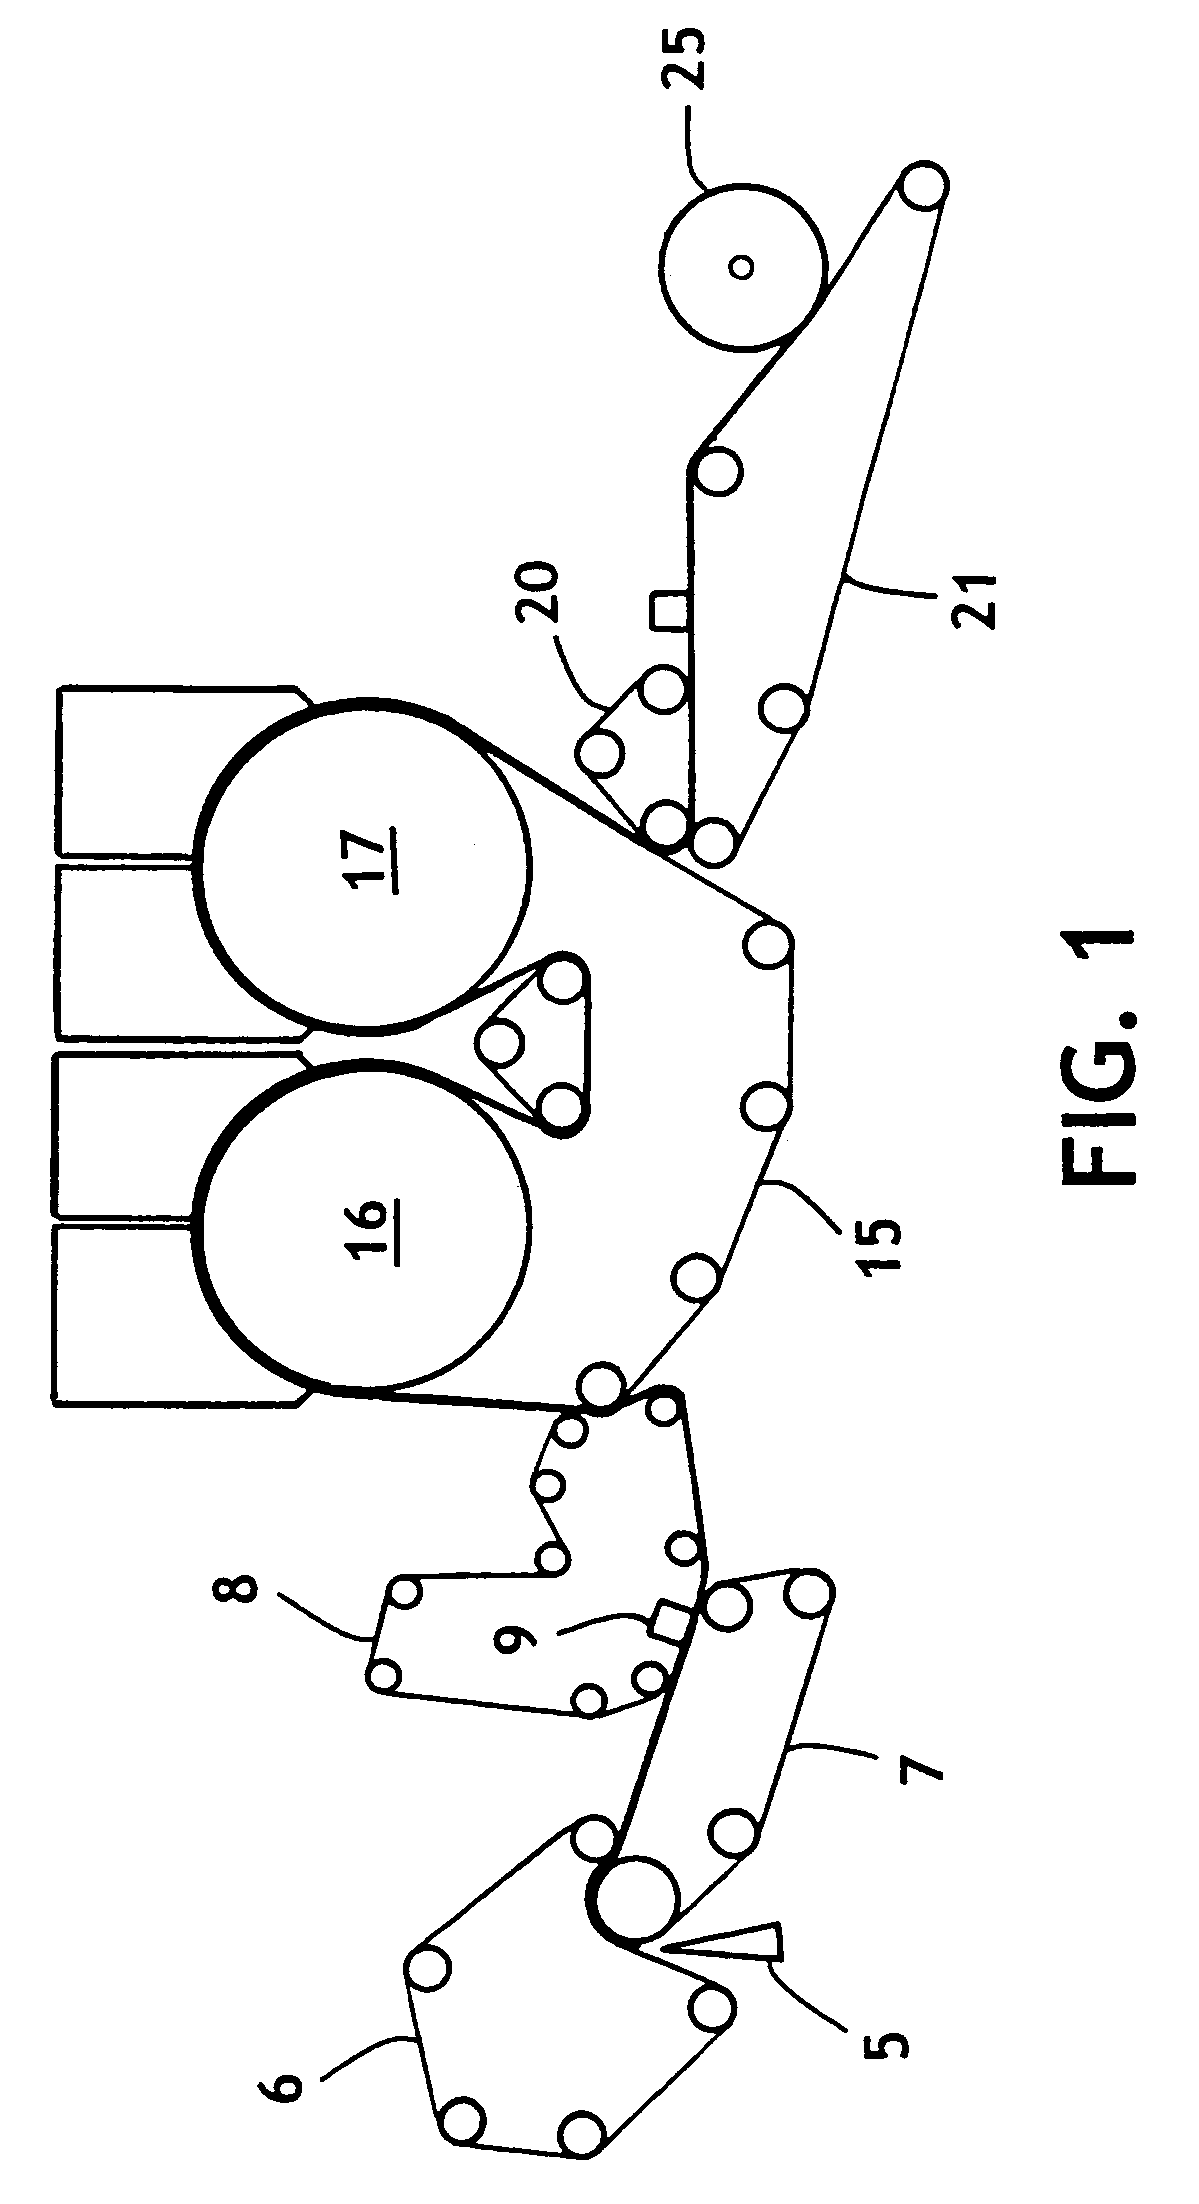 Tissue products having high durability and a deep discontinuous pocket structure